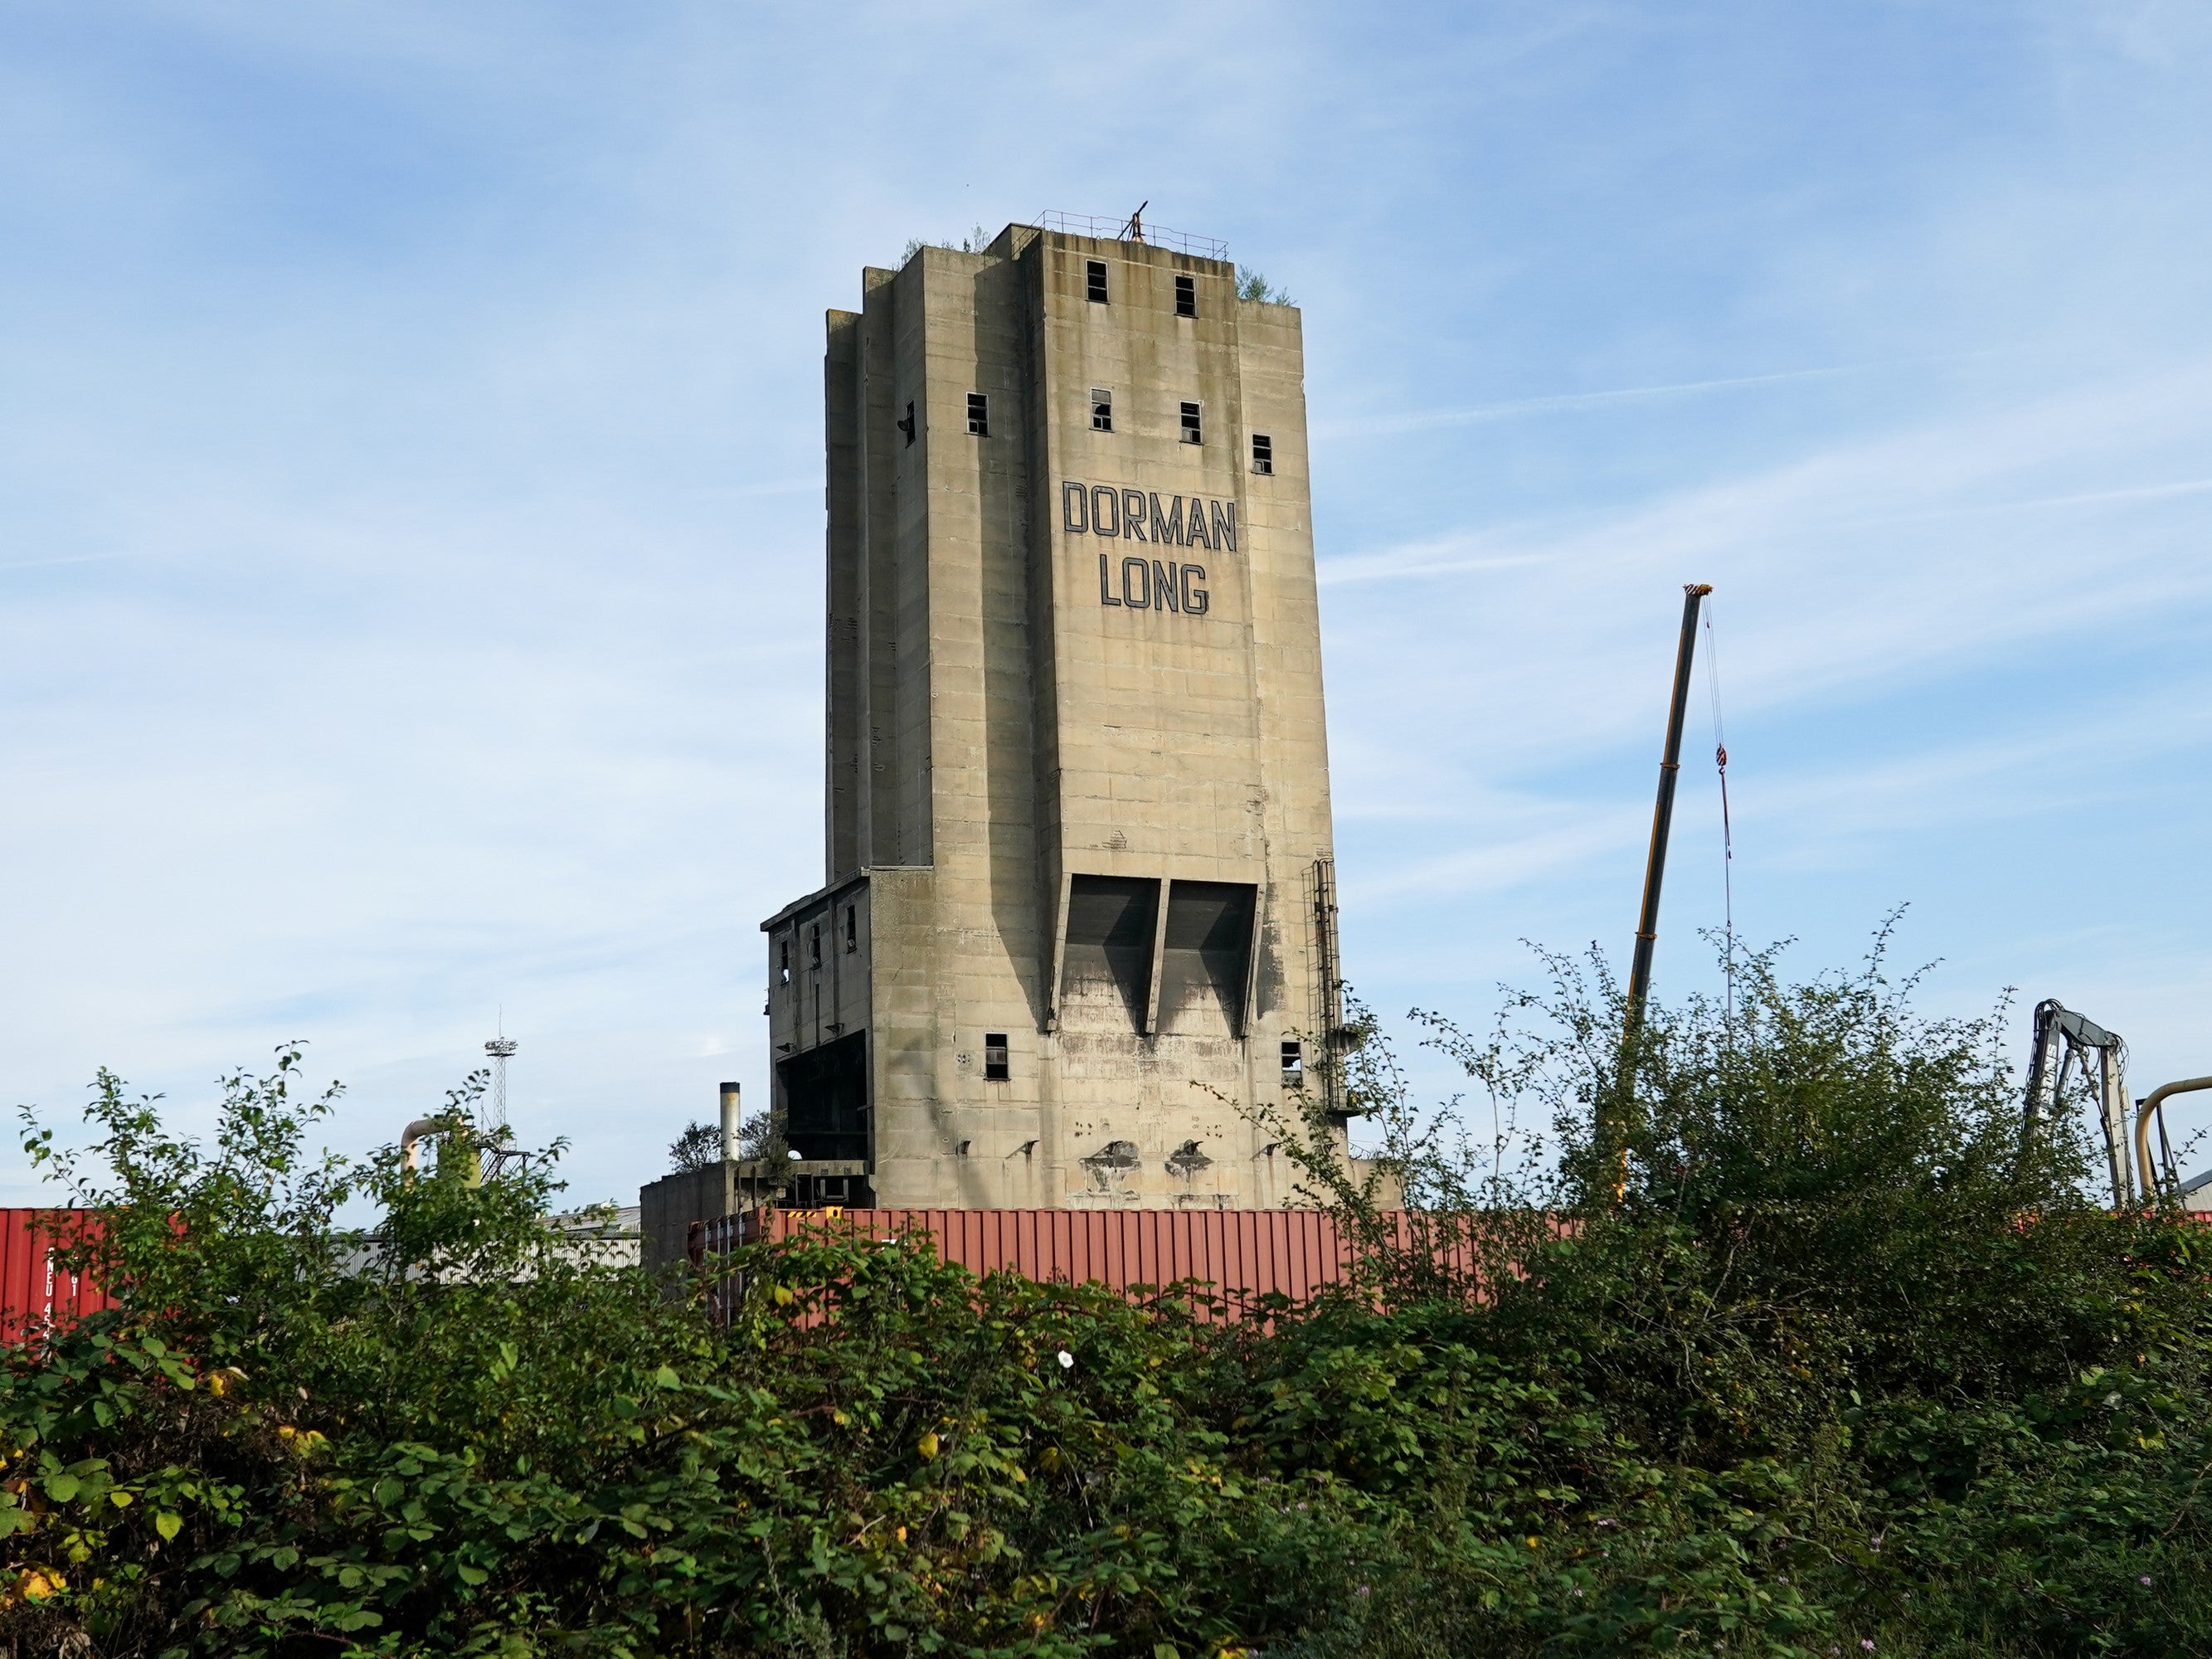 Dorman Long tower at the former Redcar SSI steelworks